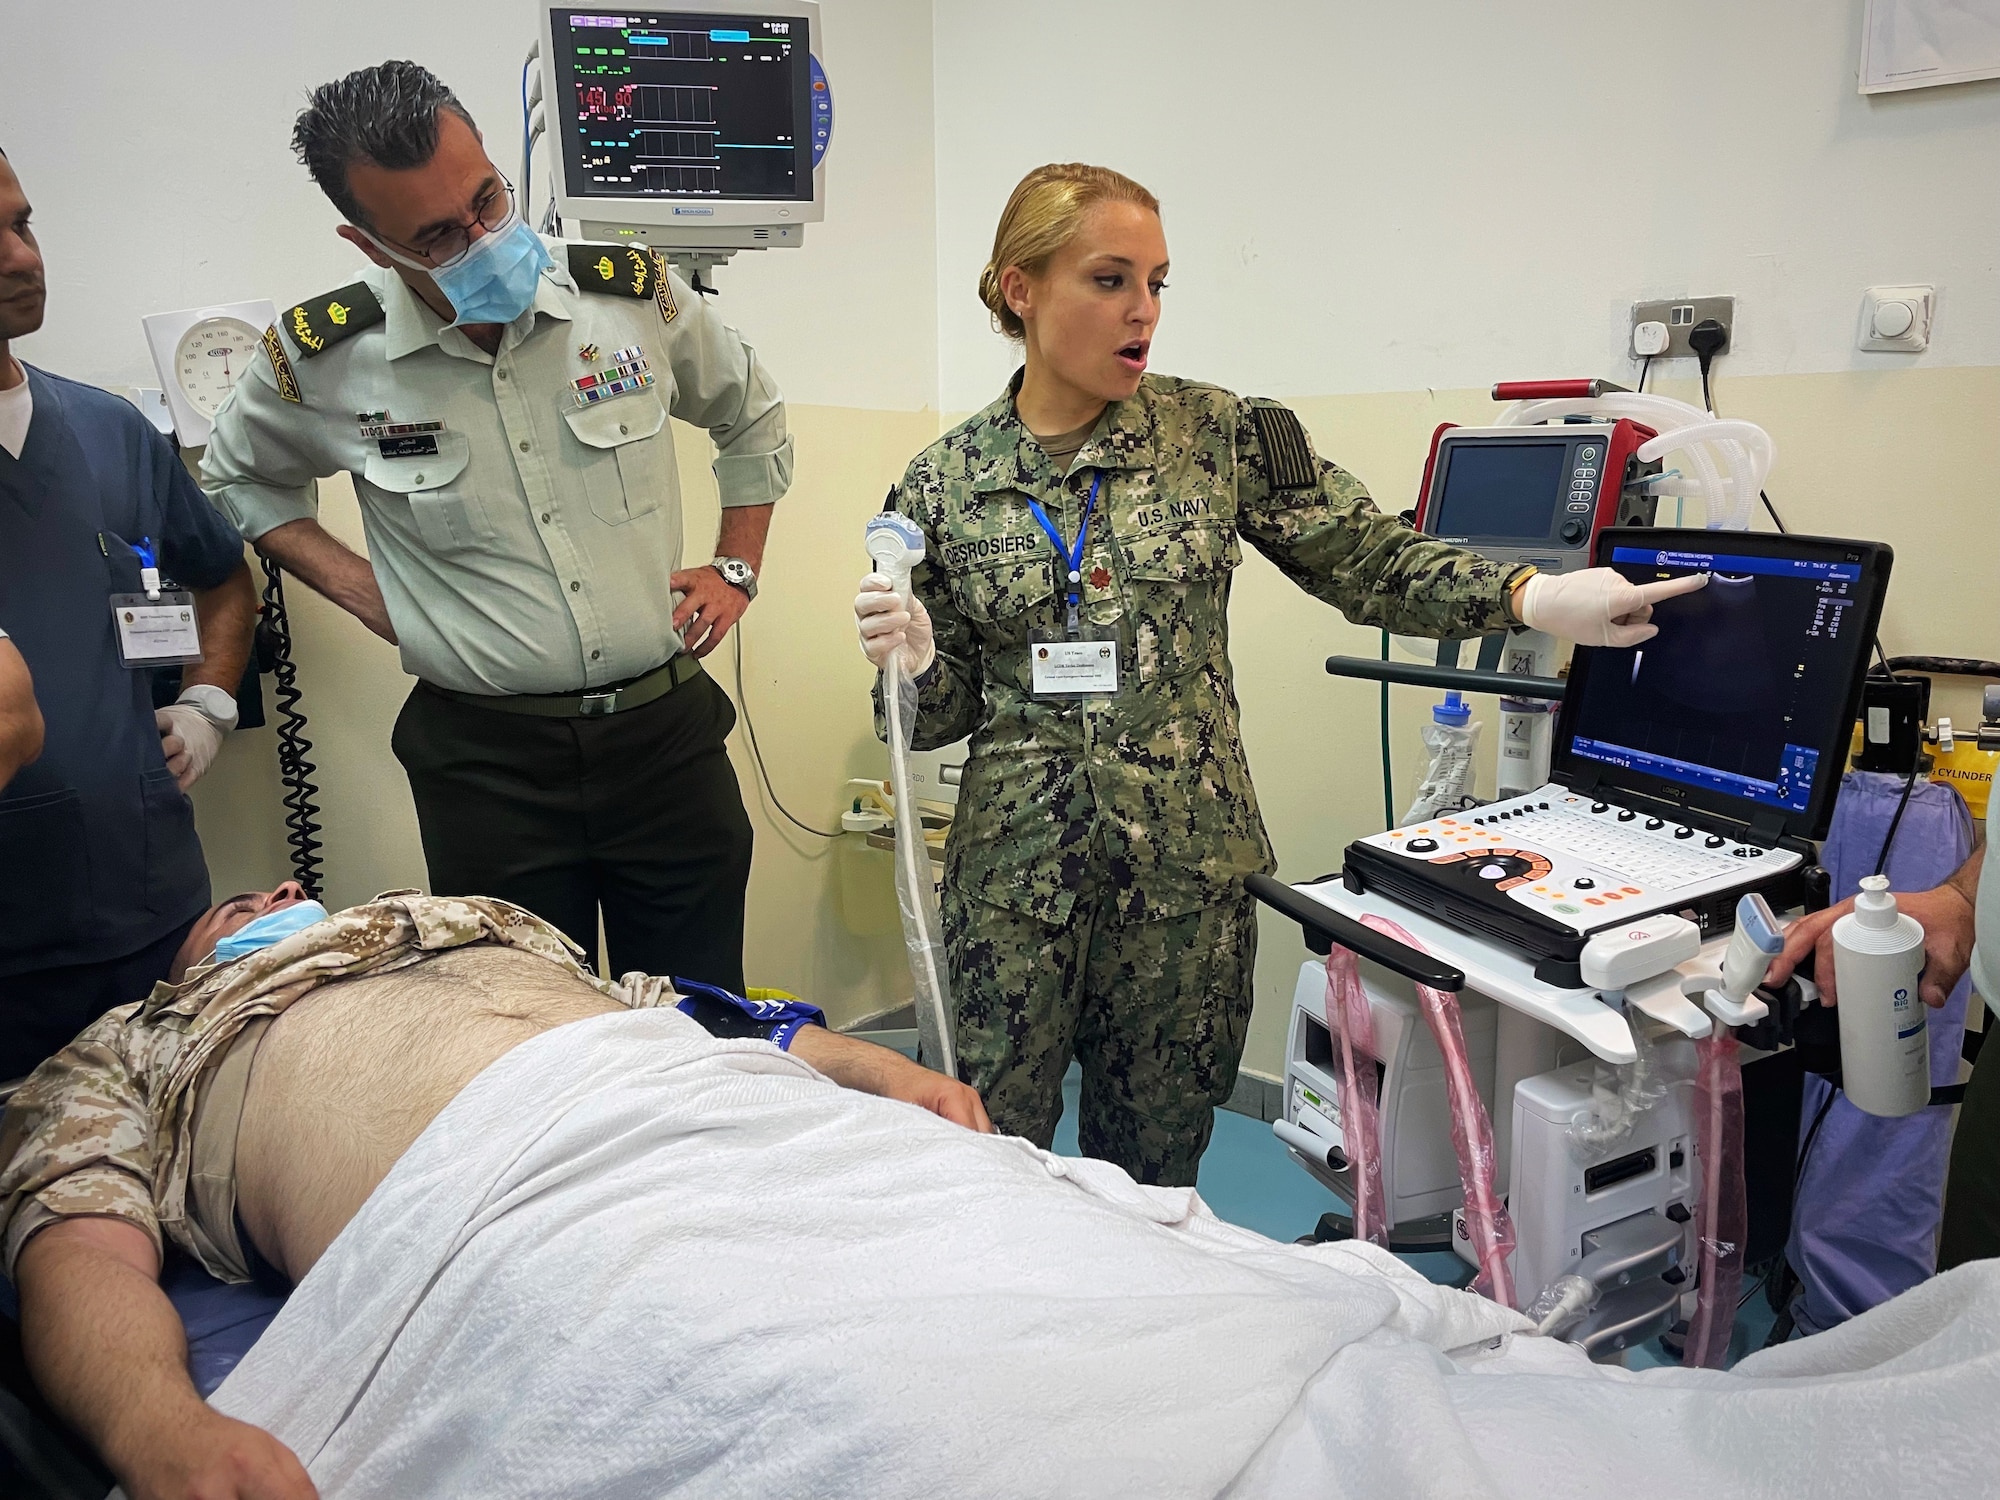 Lt. Cmdr. Taylor DesRosiers, Walter Reed Medical Center critical care fellow, points to a structure on an ultrasound machine screen prior to providing a demonstration of various techniques inside the King Hussein Medical Center May 9, 2022 in Amman, Jordan.